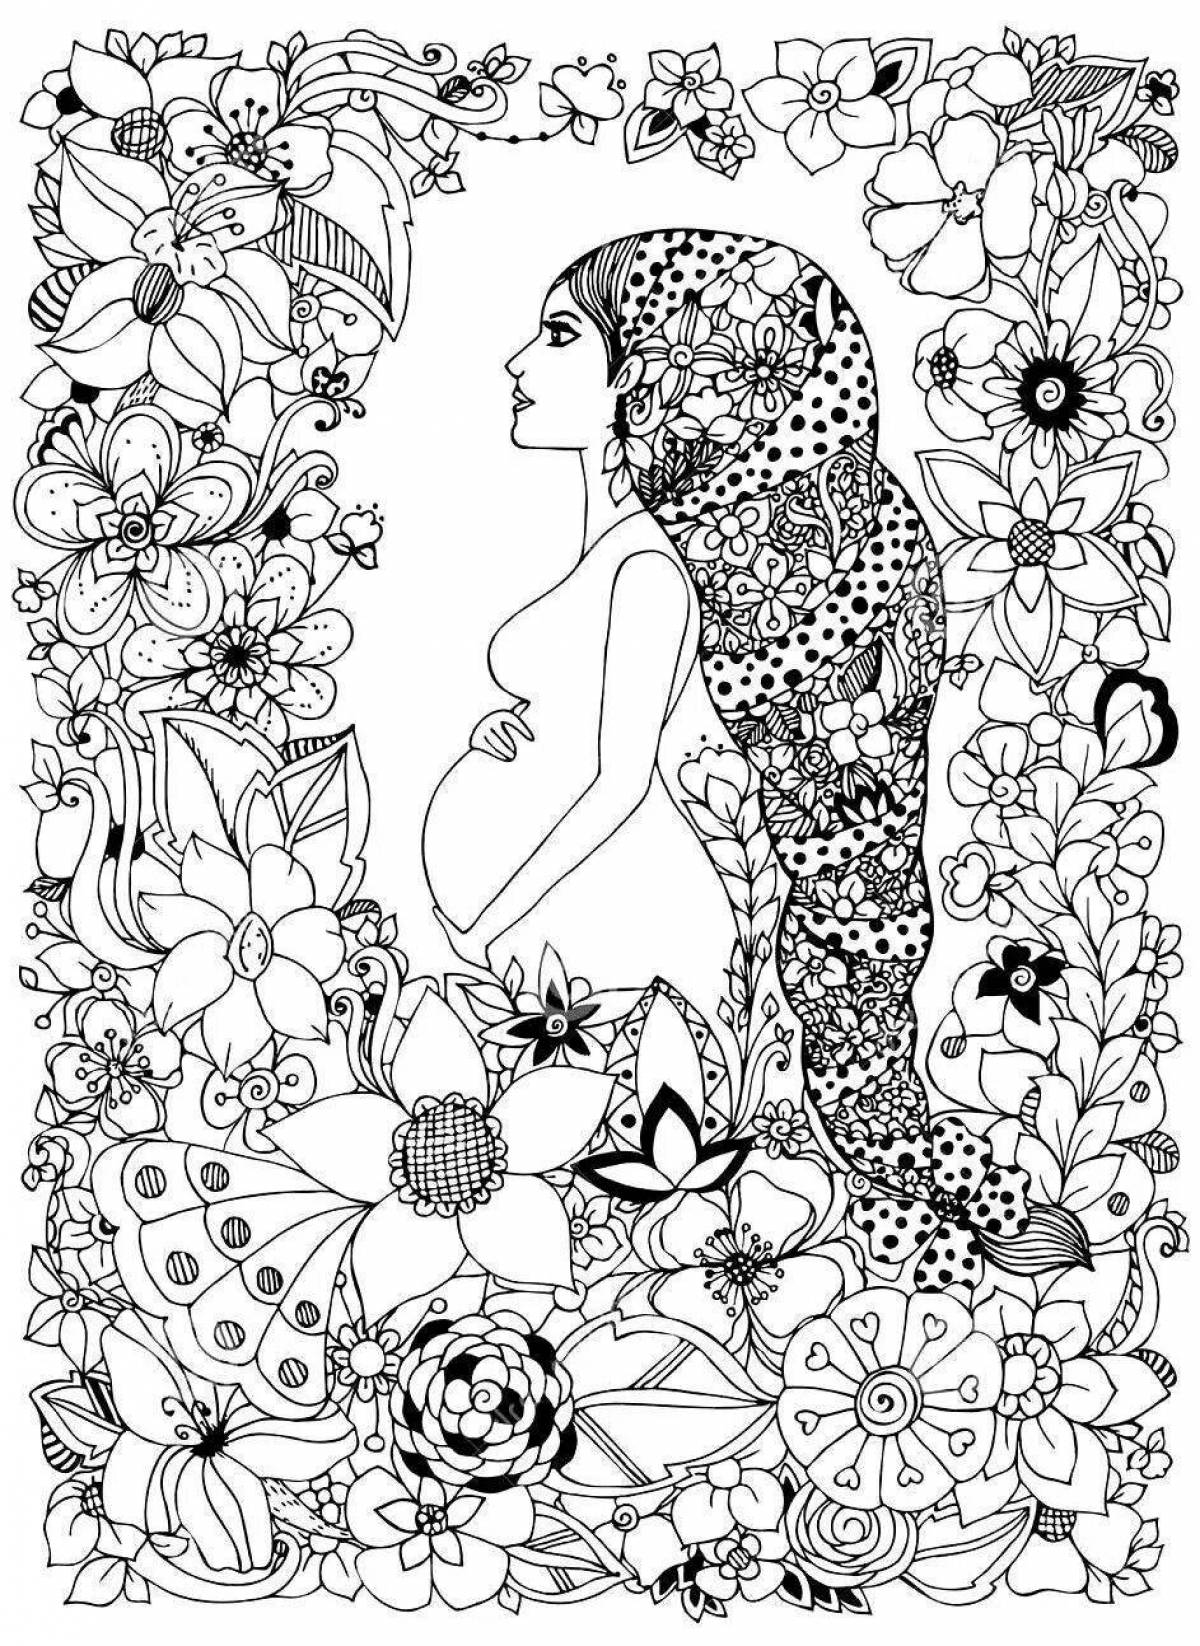 Animated pregnancy coloring page